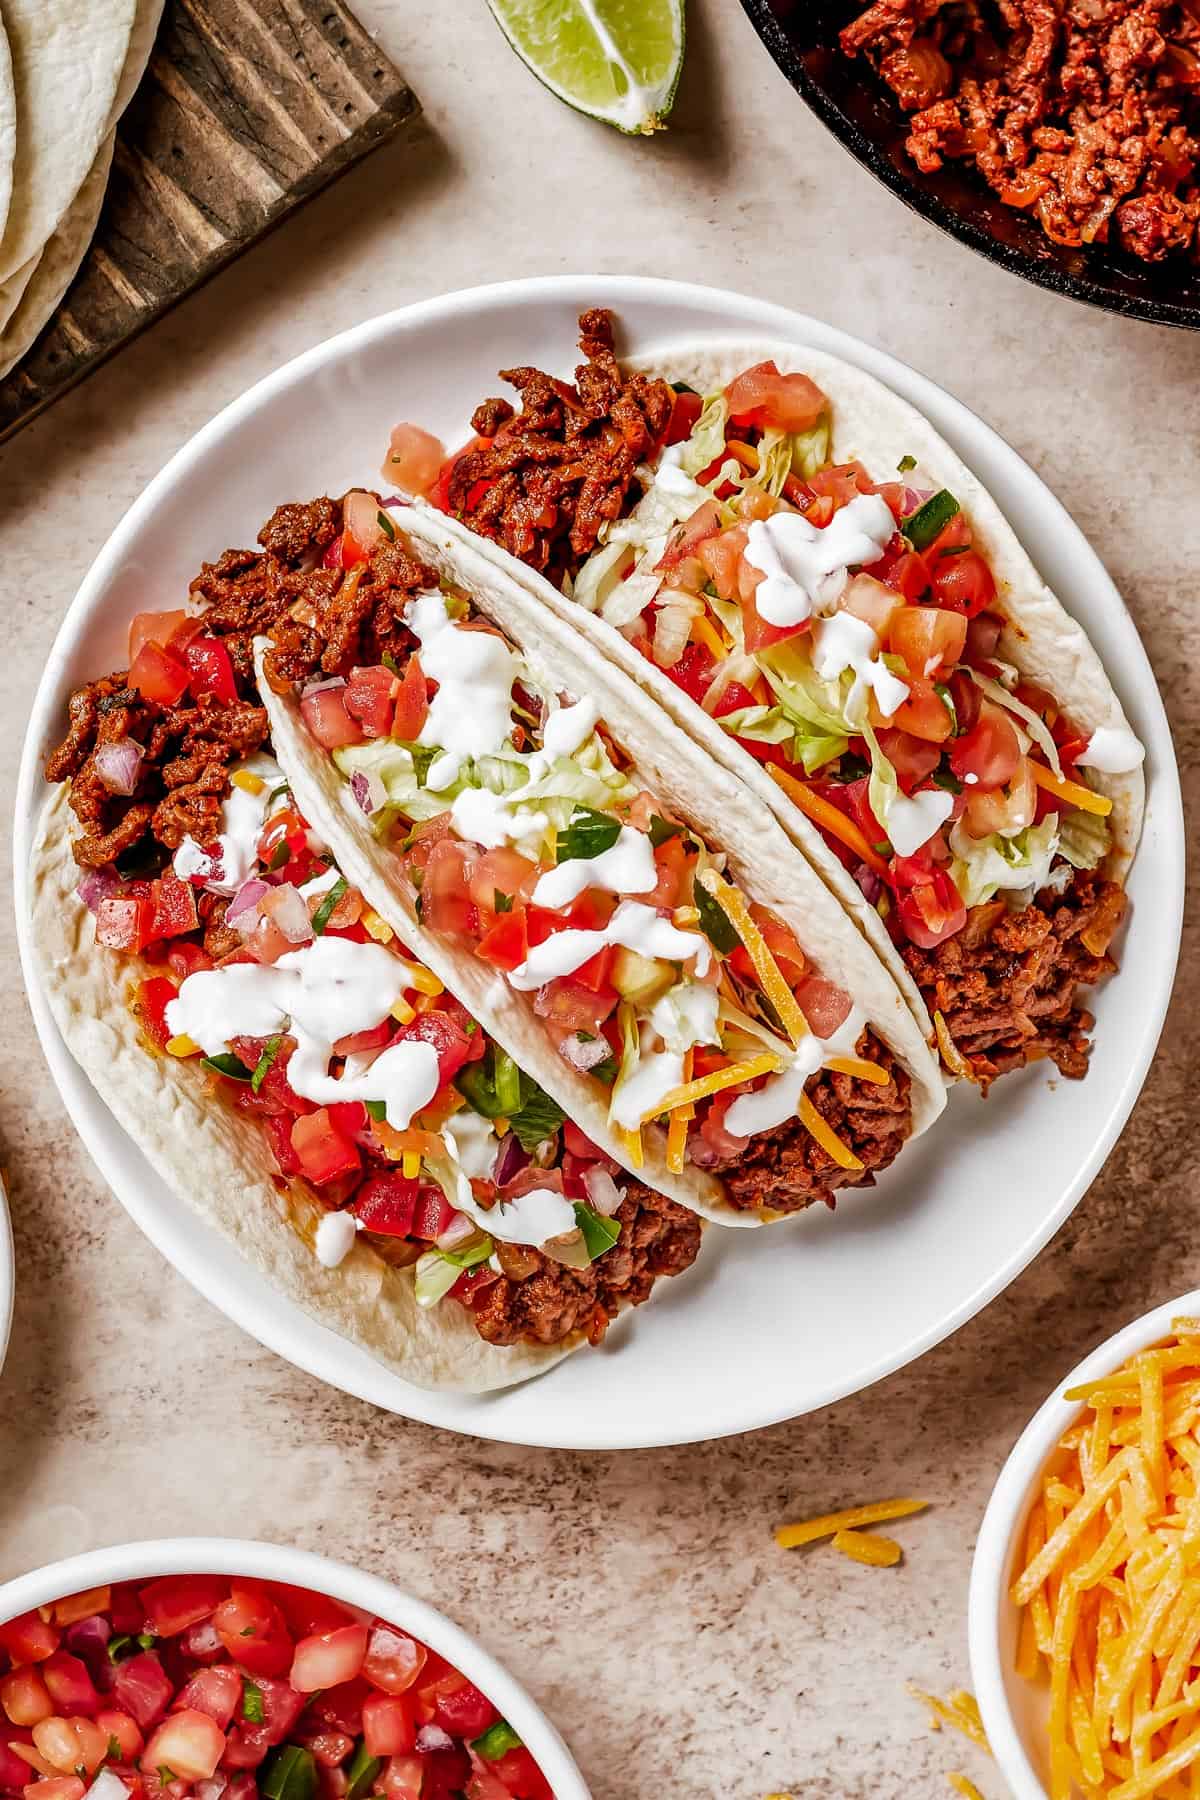 Three ground beef tacos on a plate.